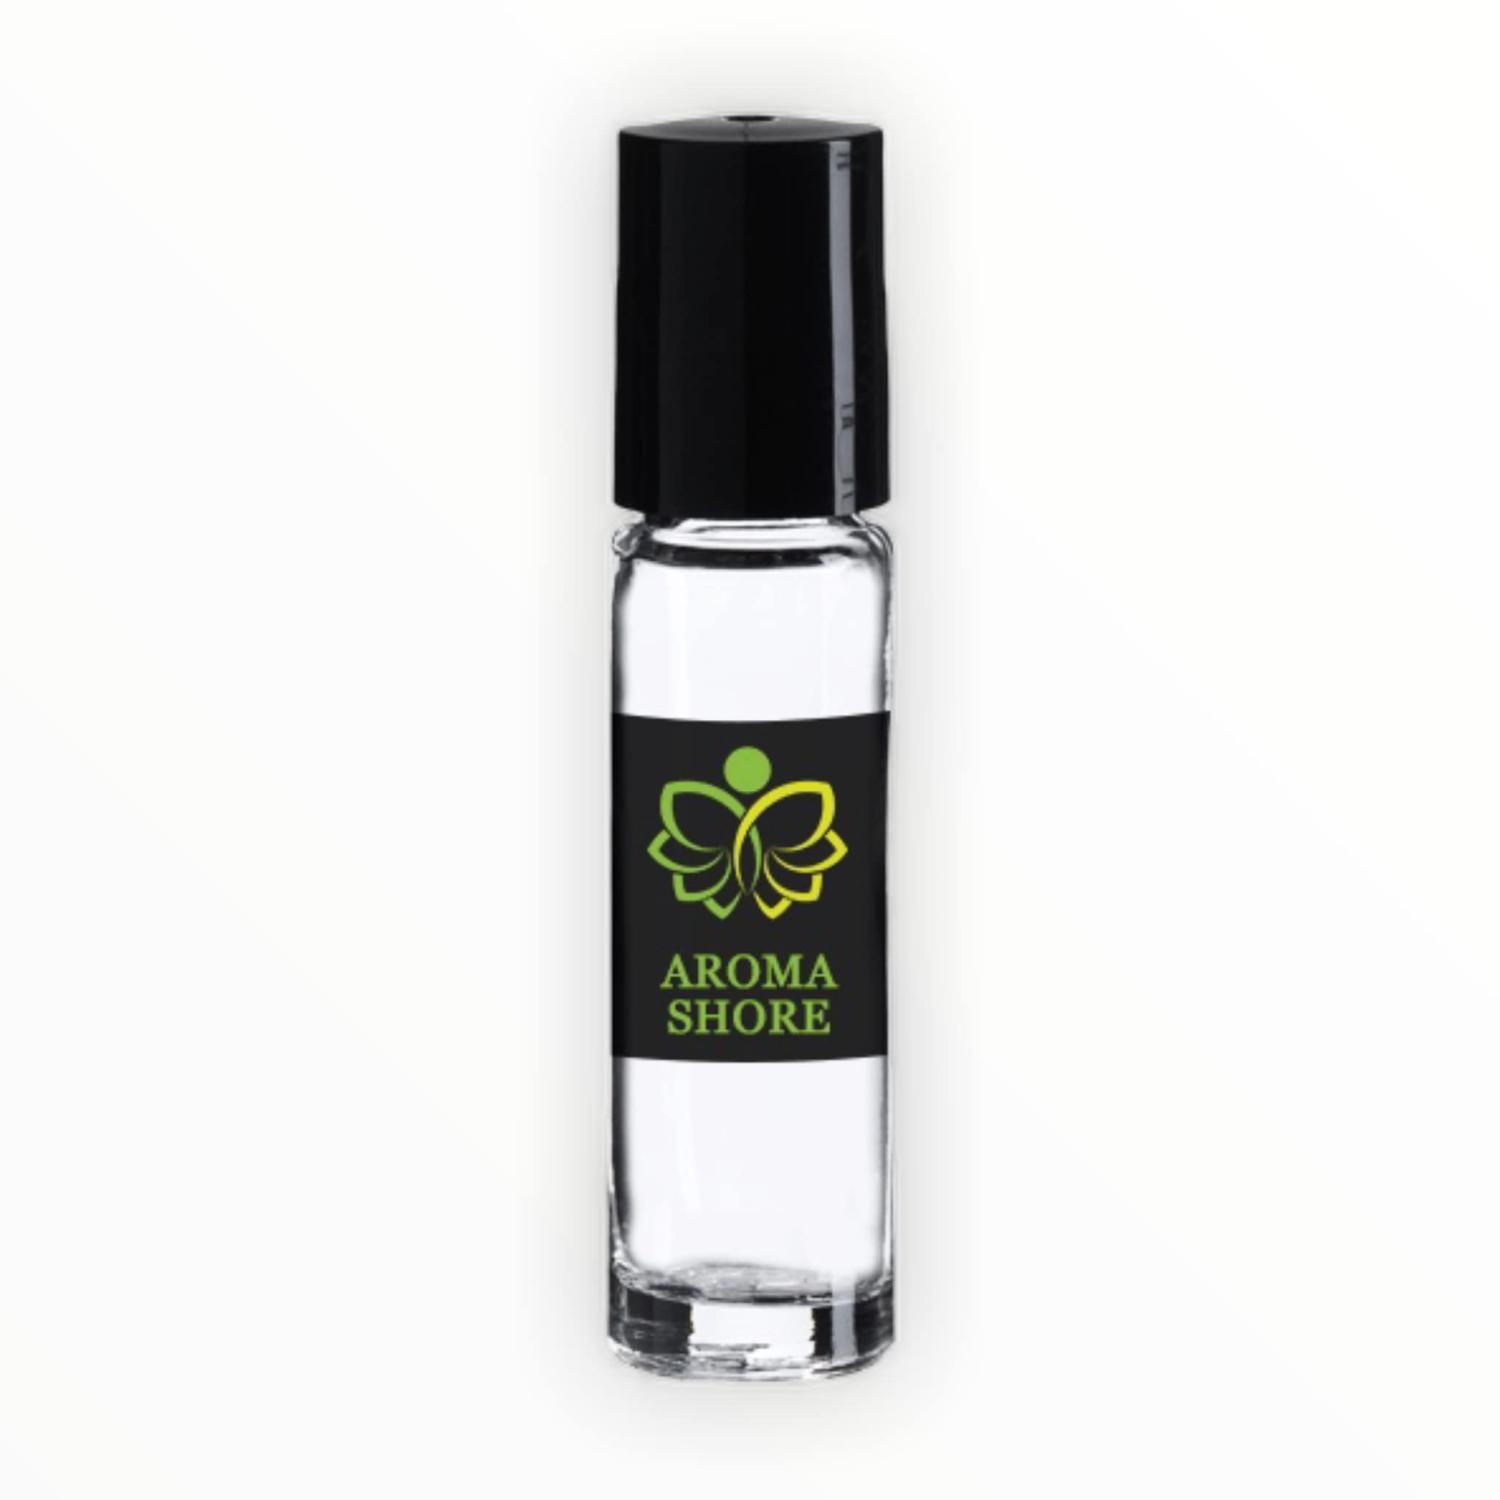 Aroma Shore Perfume Oil - Our Impression Of Louis Vuitton Ombre Nomade Type  100% Pure Uncut